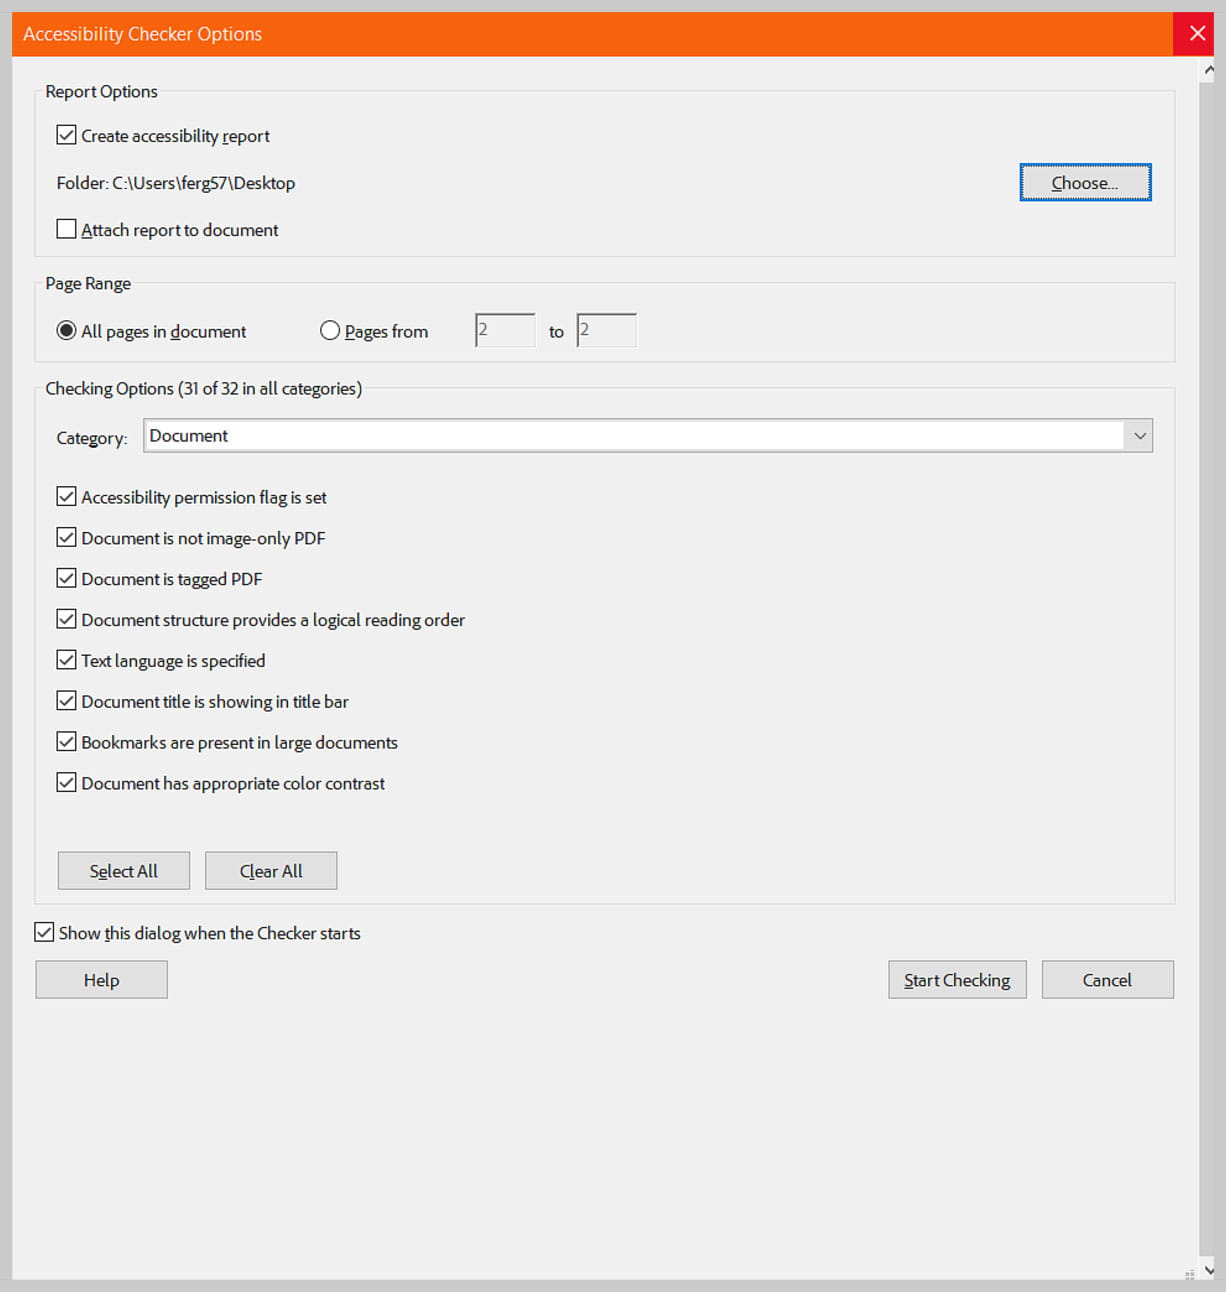 Screenshot of Adobe Acrobat Pro showing the Accessibility Checker Options